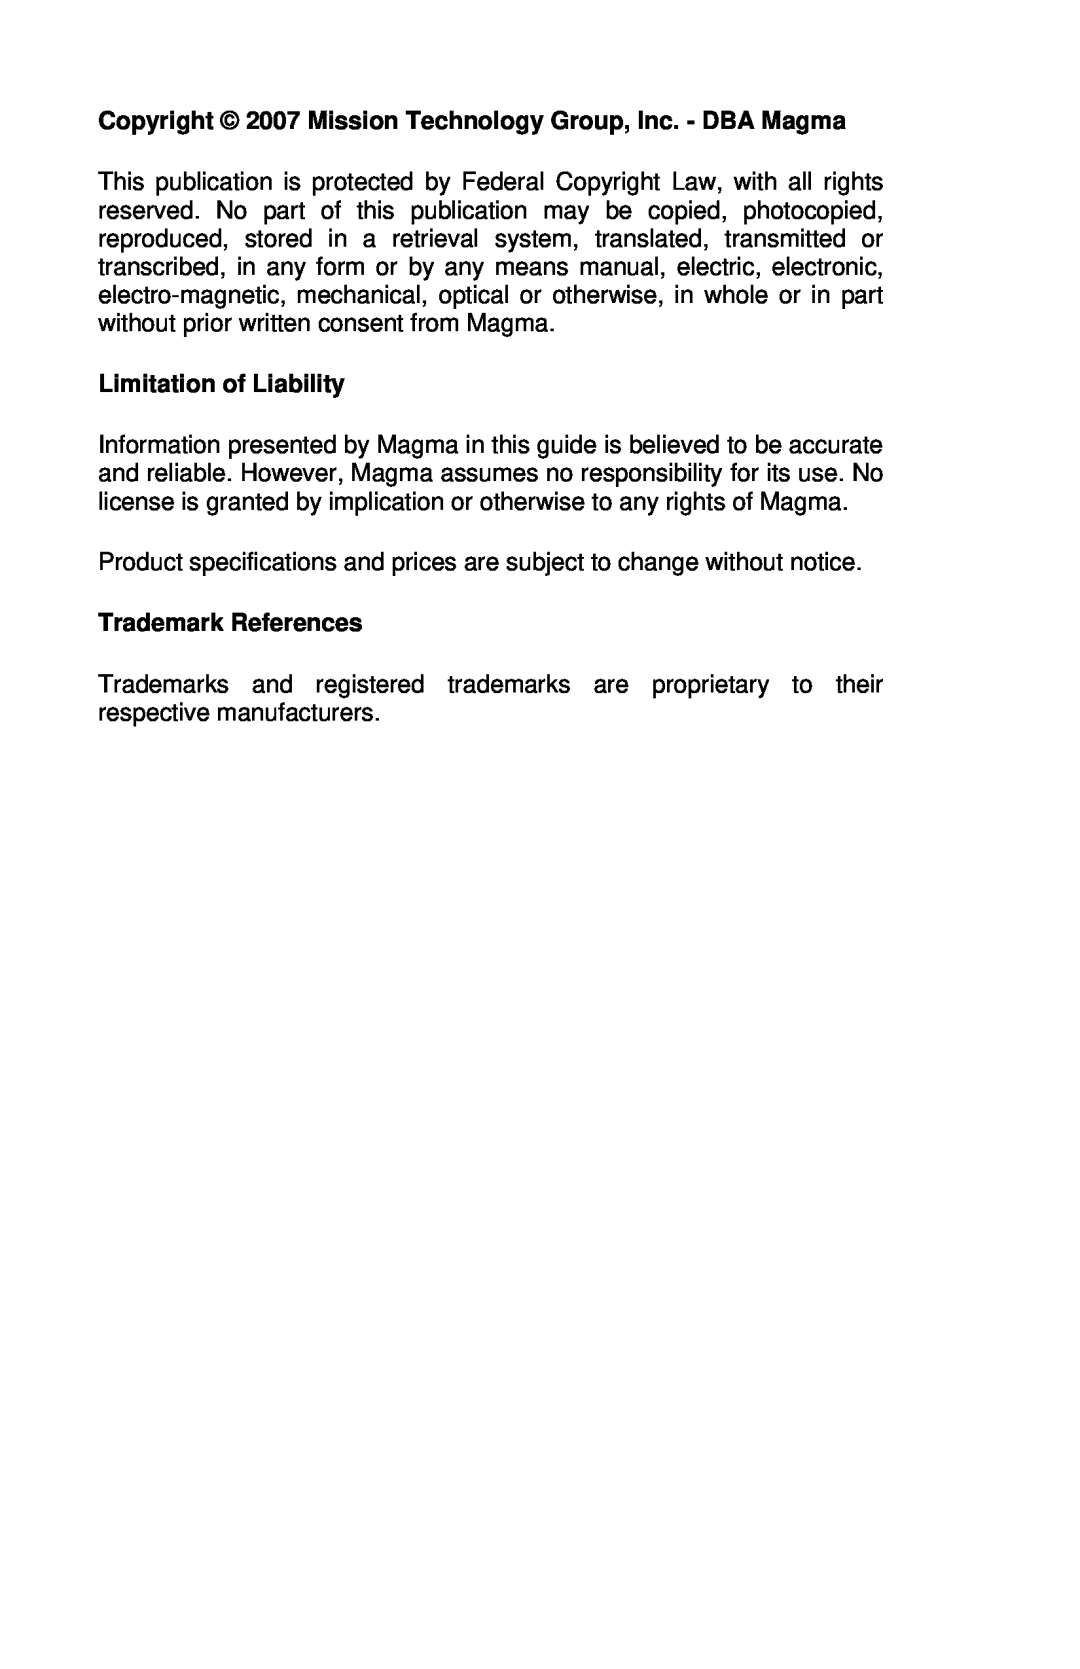 Magma P13RR-TEL Copyright 2007 Mission Technology Group, Inc. - DBA Magma, Limitation of Liability, Trademark References 